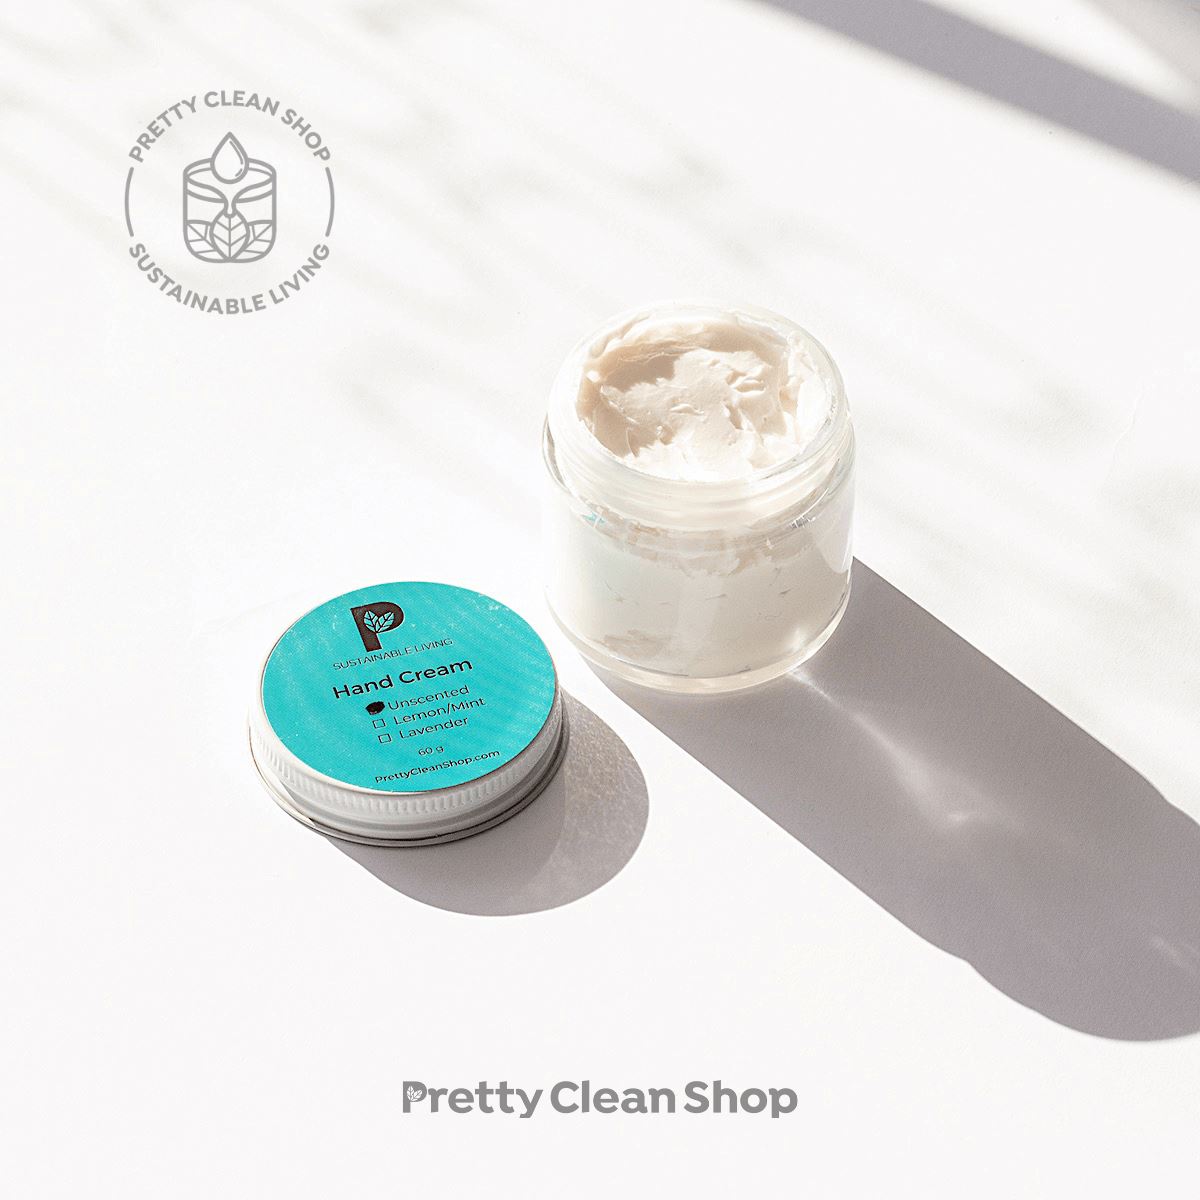 Hand Cream Bath and Body Pretty Clean Living 60ml RETURNABLE glass jar includes $1.25 deposit / Unscented Prettycleanshop